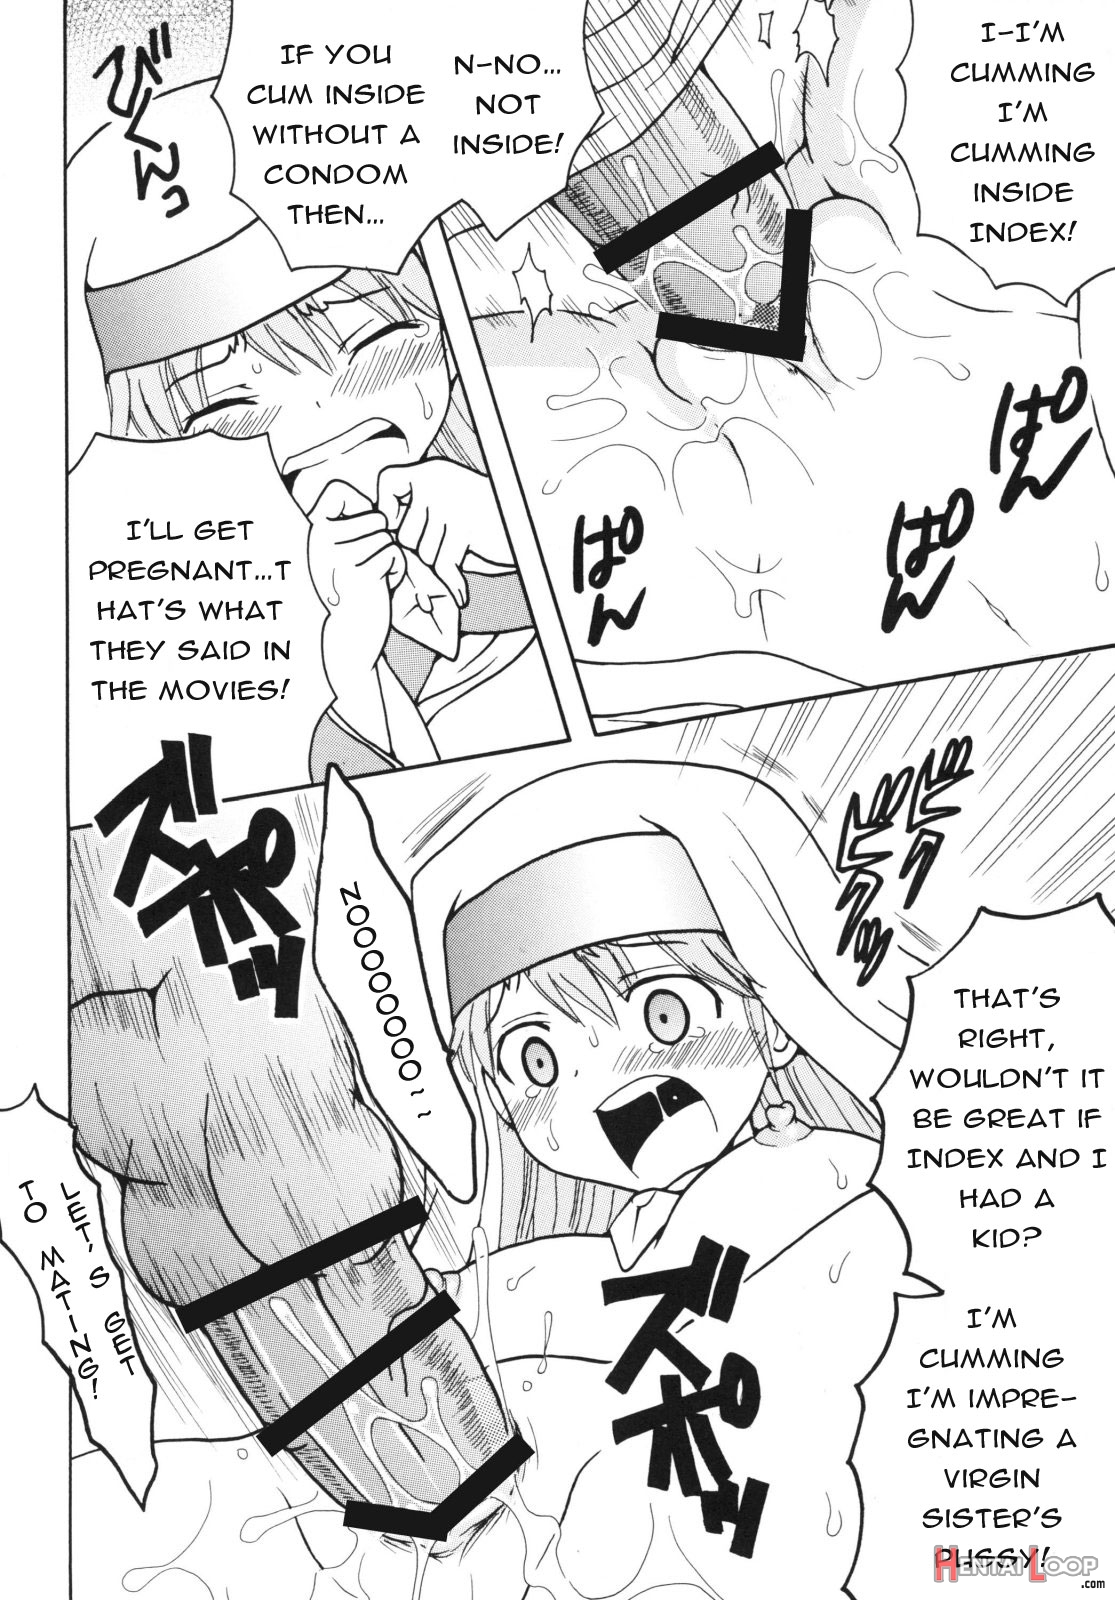 A Certain Magical Lewd Index #2 page 40